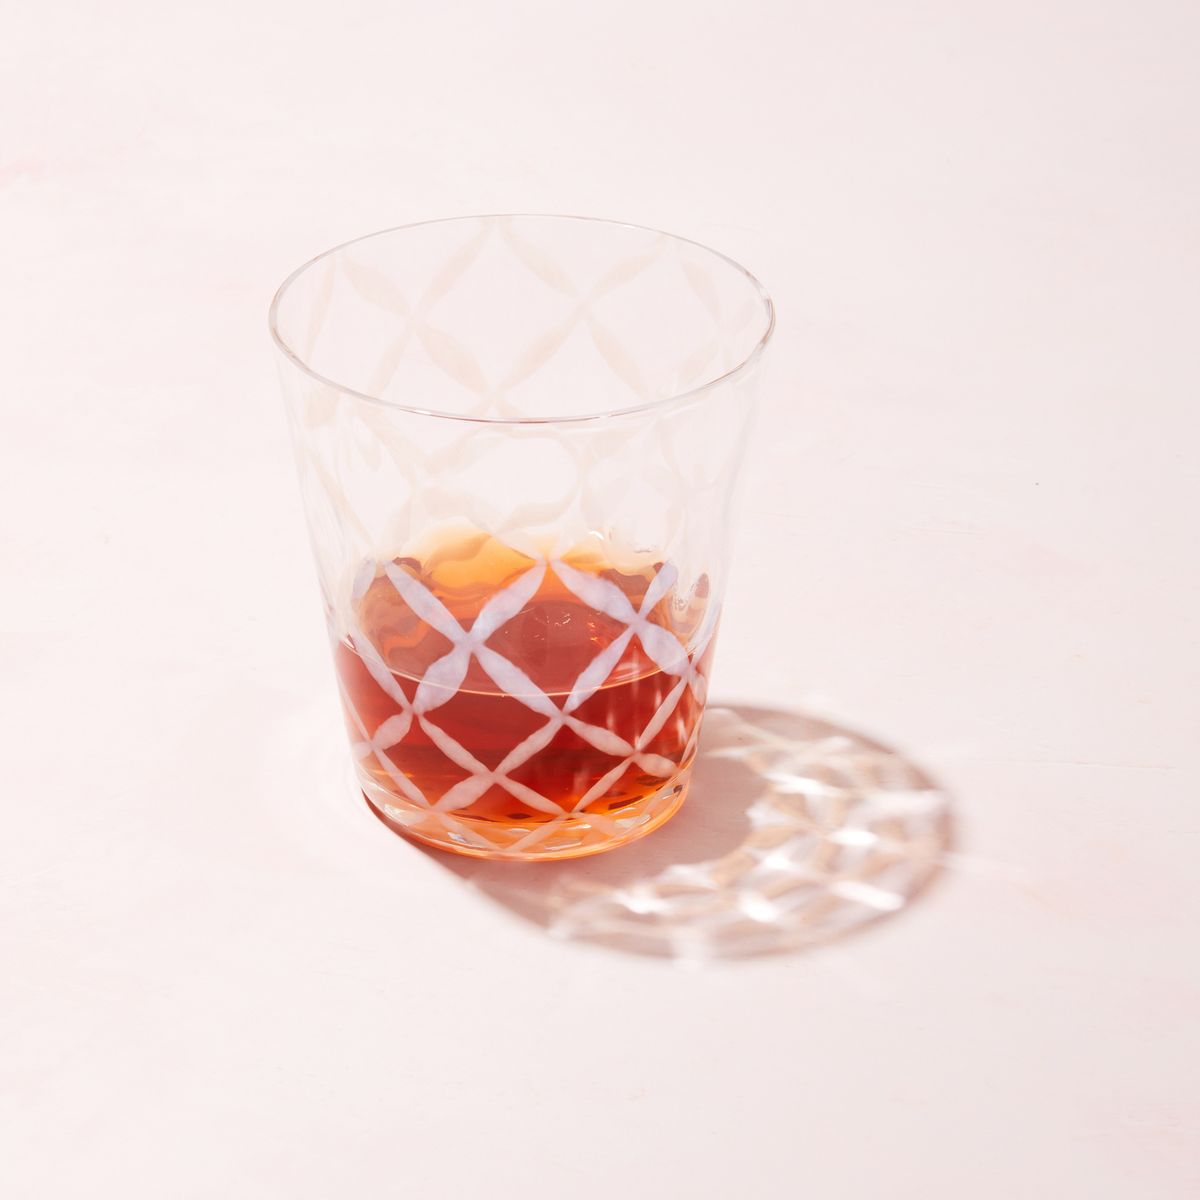 A short clear glass with a delicate grid pattern, half filled with drink and casting a shadow